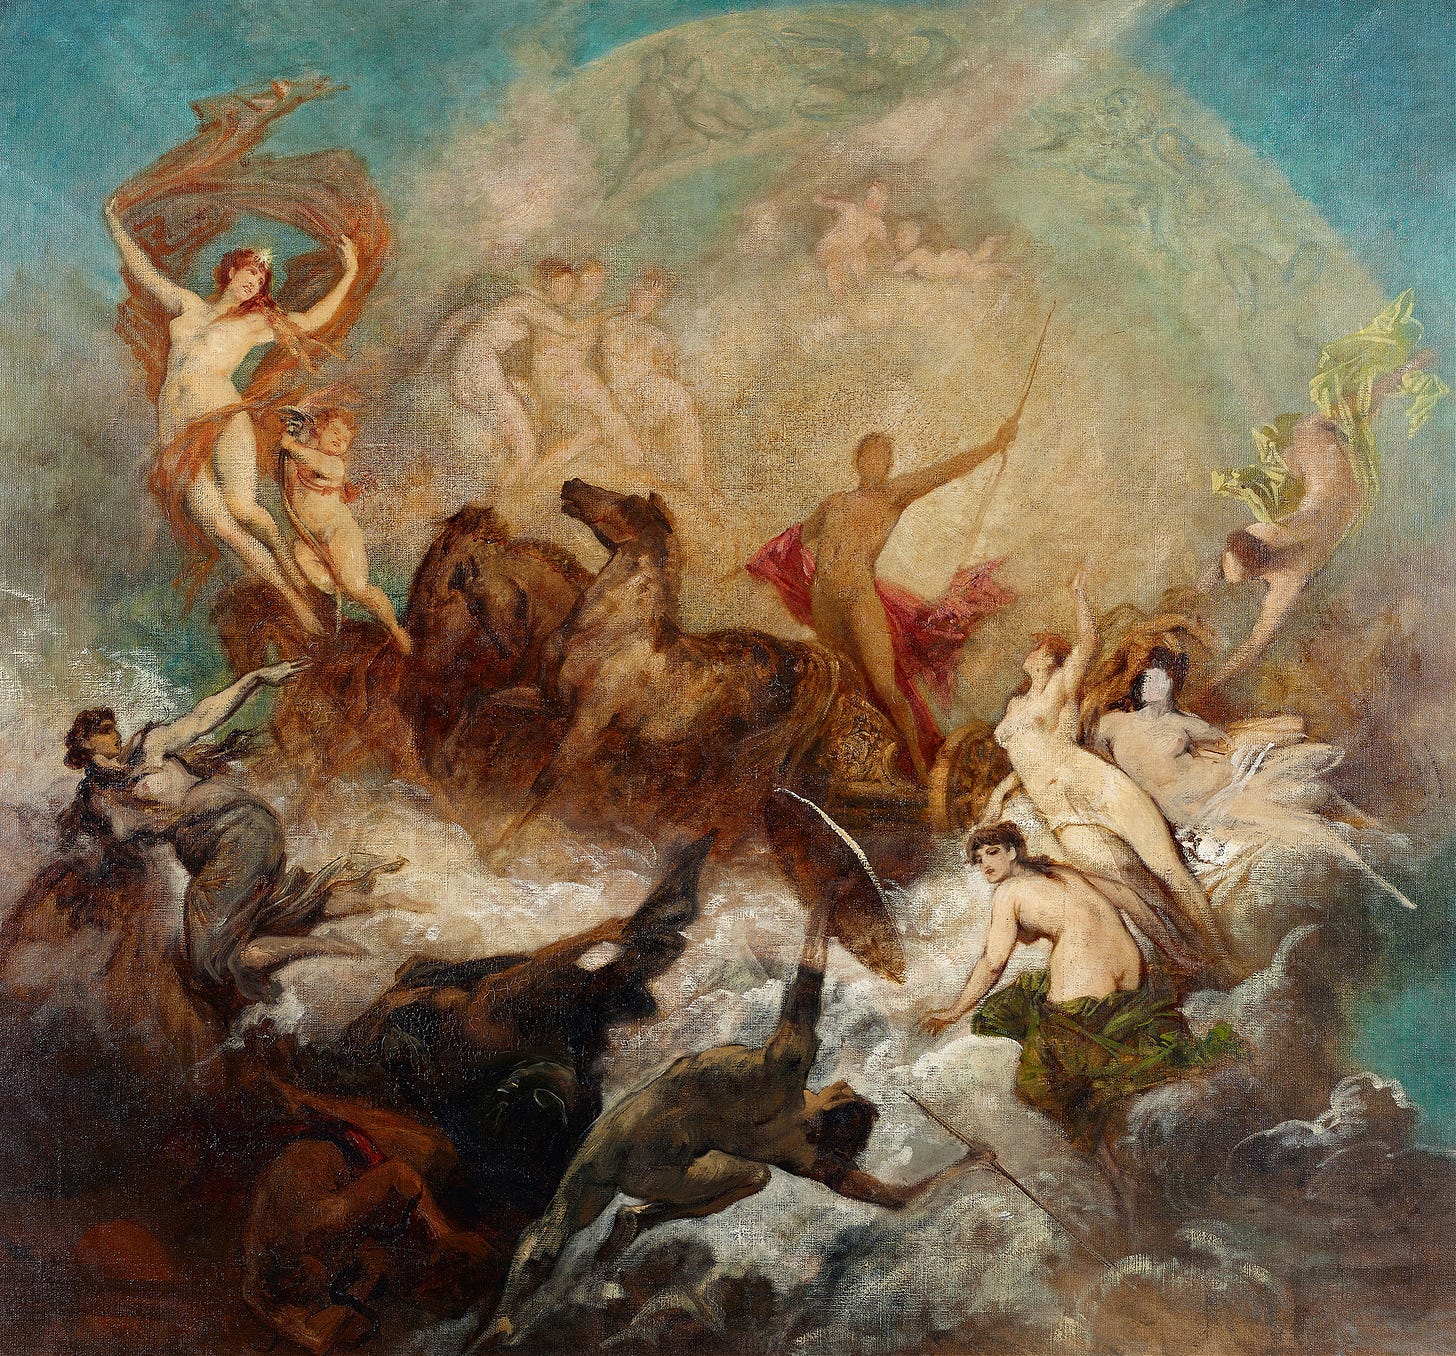 The victory of light over darkness (1883-1884) by Hans Makart